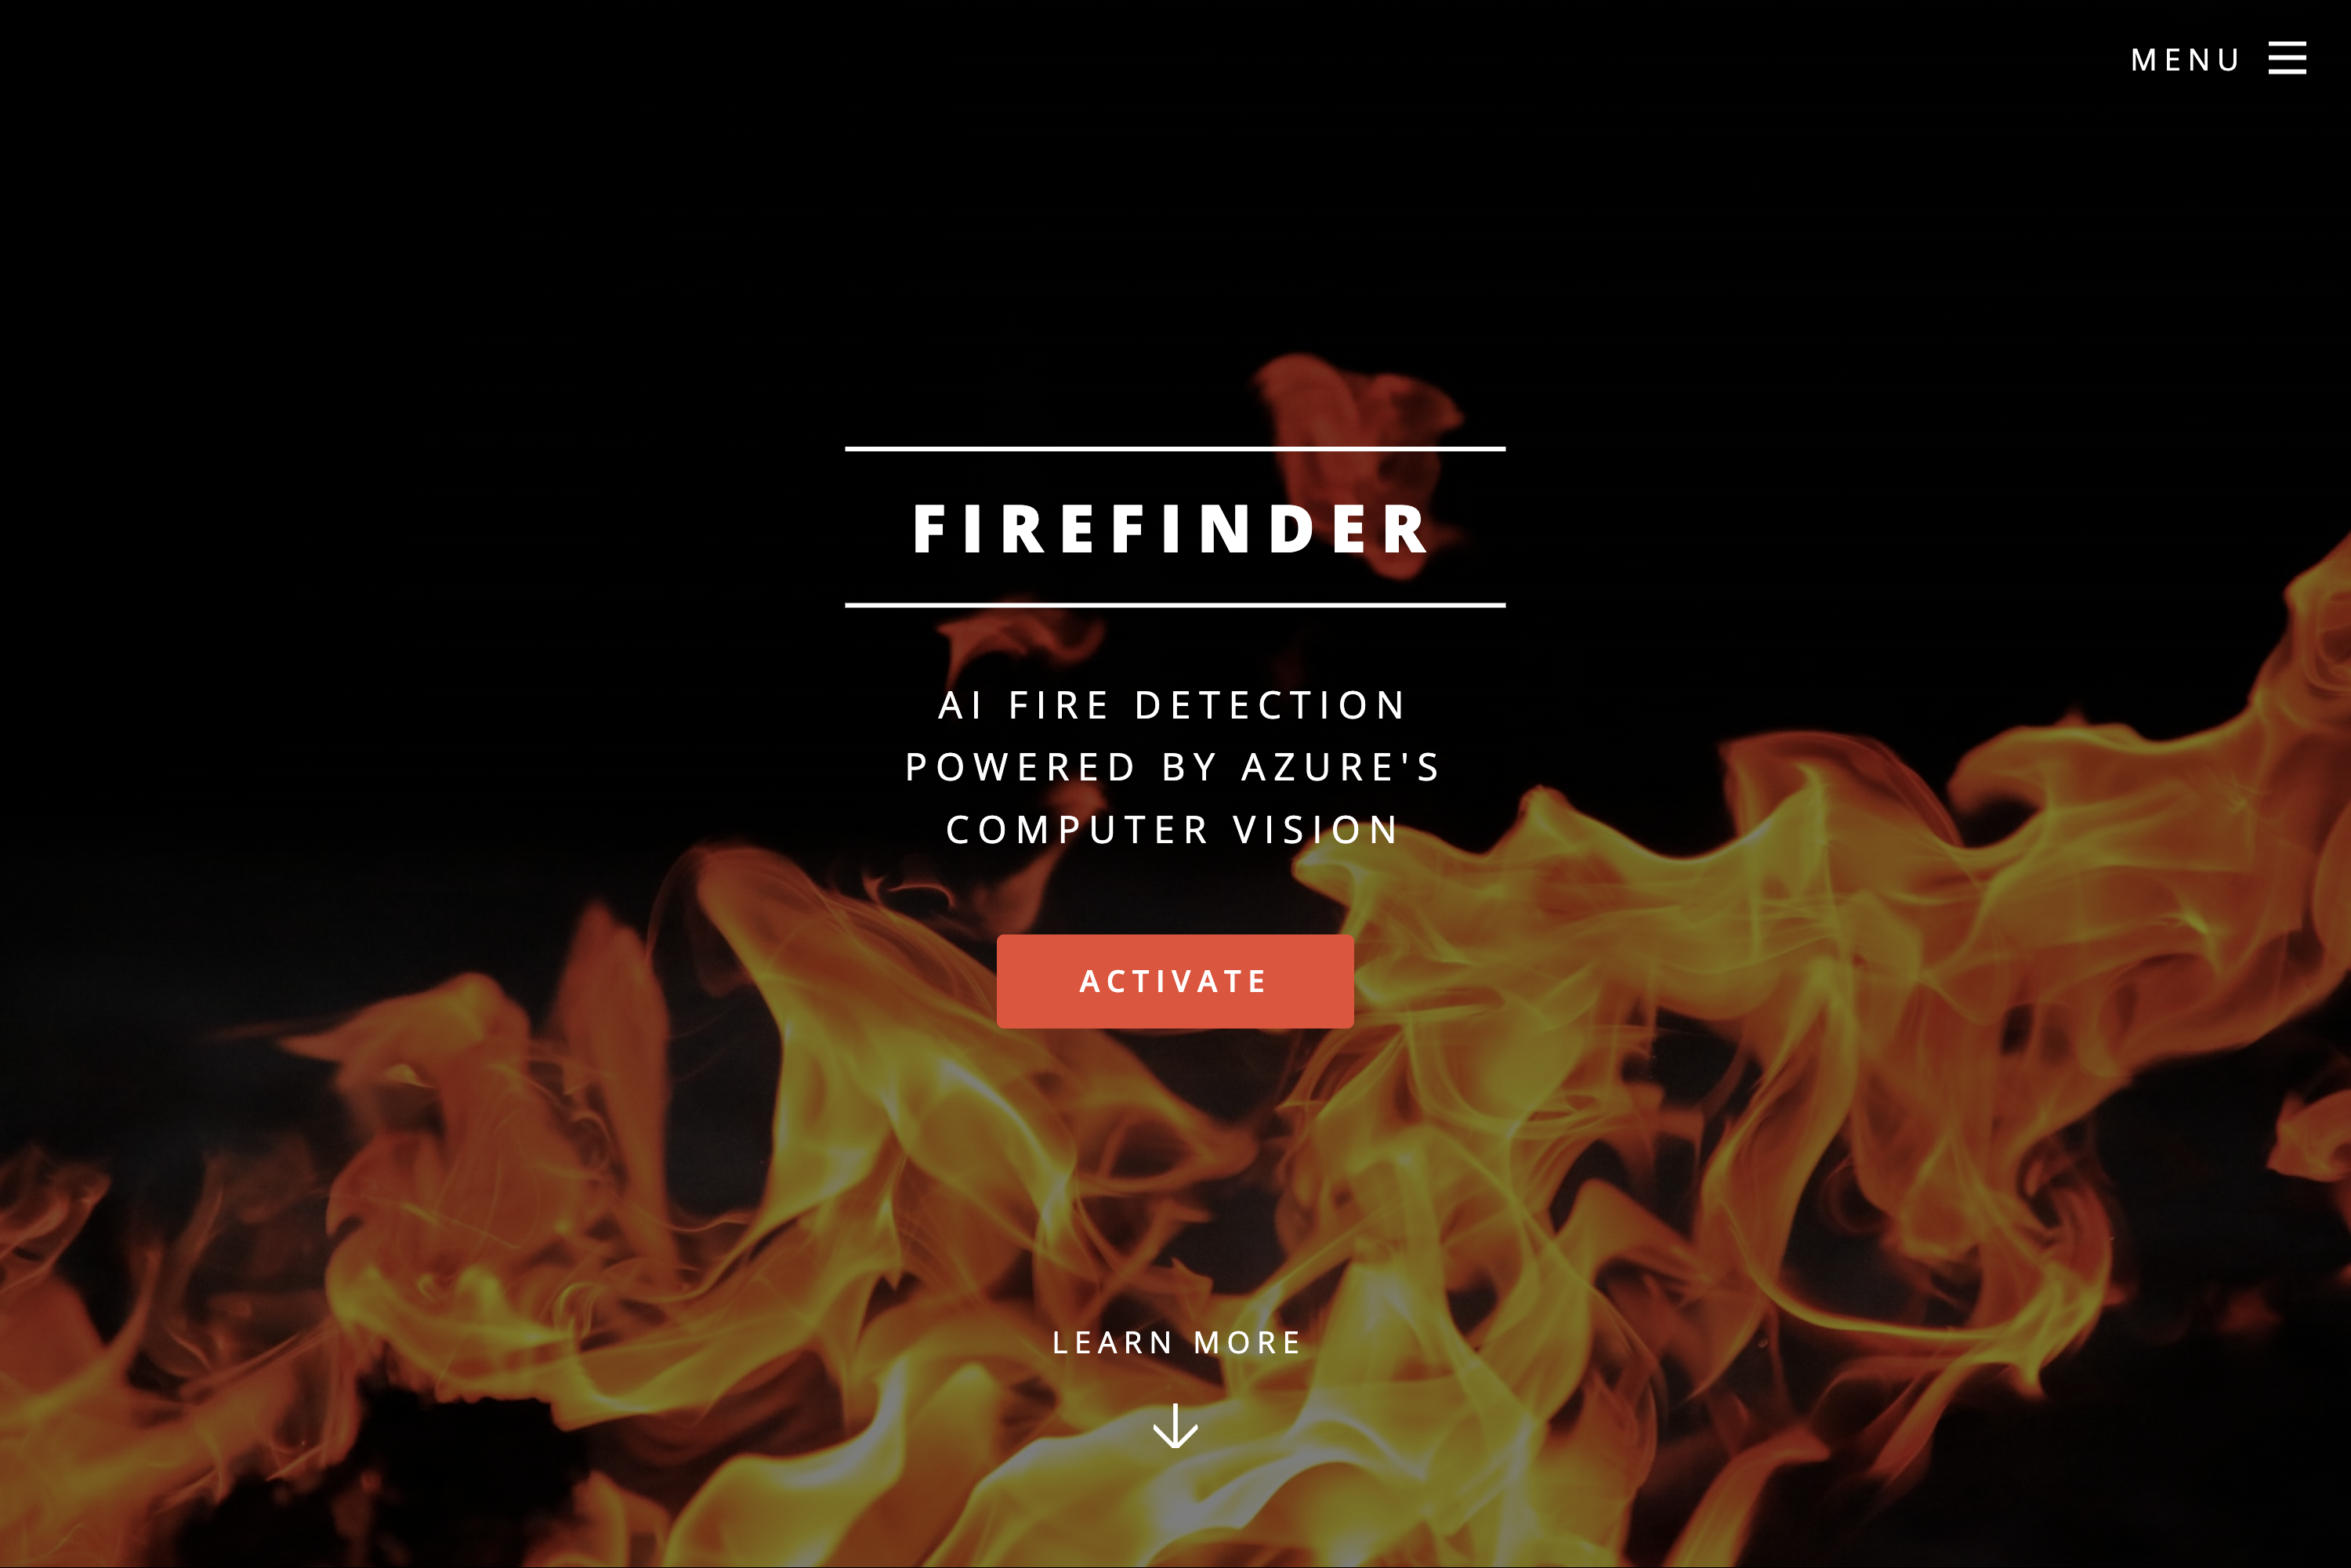 A screenshot of the FireFinder AI fire detection app with black background with flames